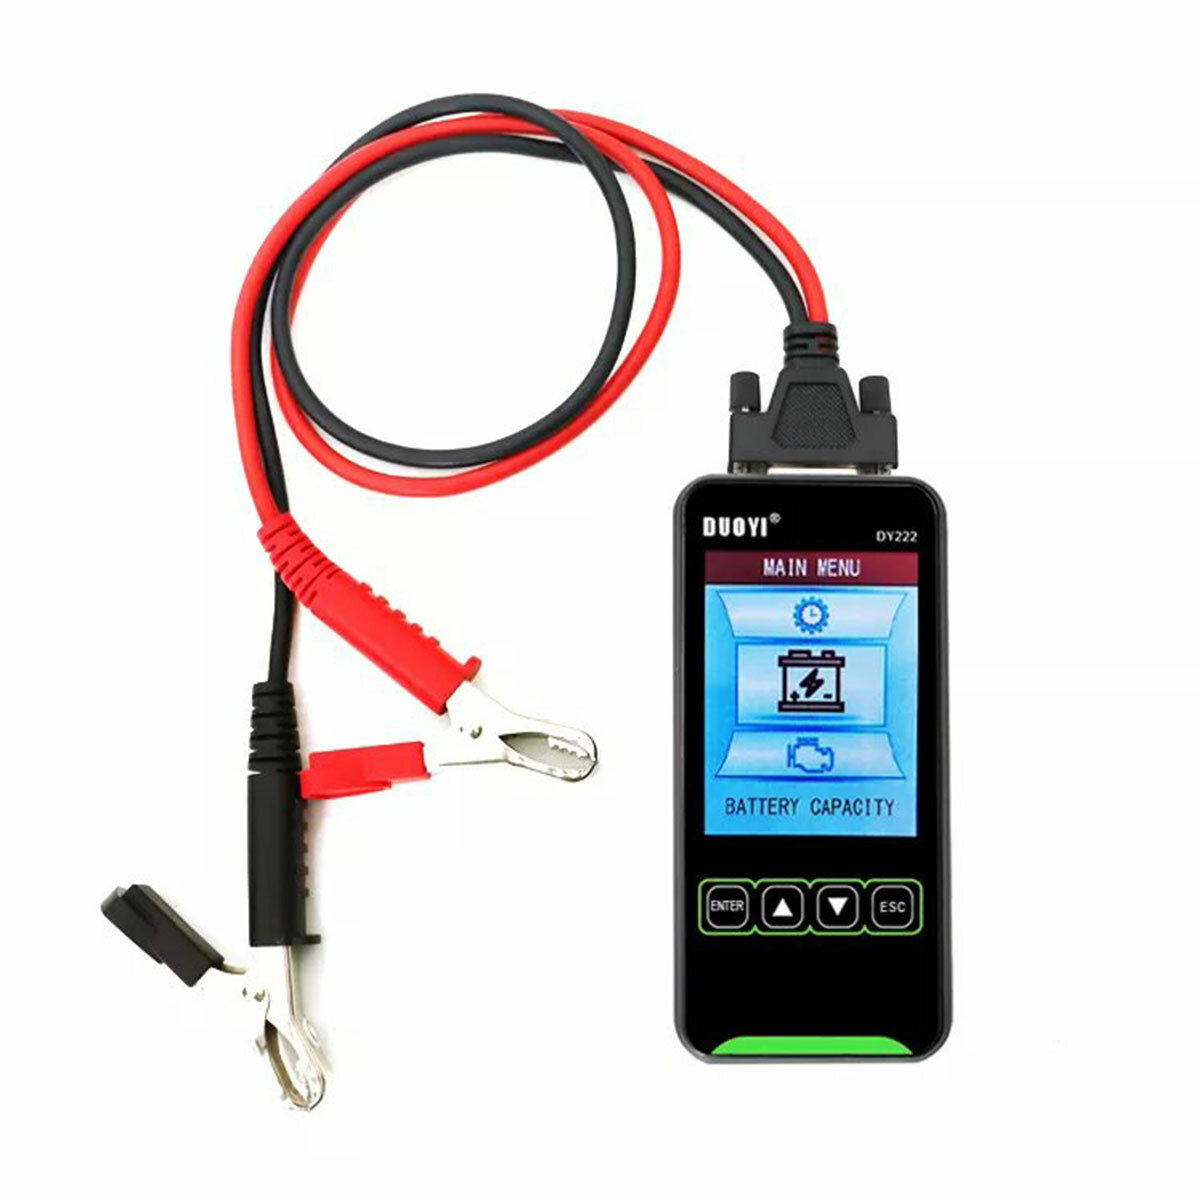 

DY222 12-24V New Generation Automobile And Motorcycle Battery Tester Supports 15 Languages